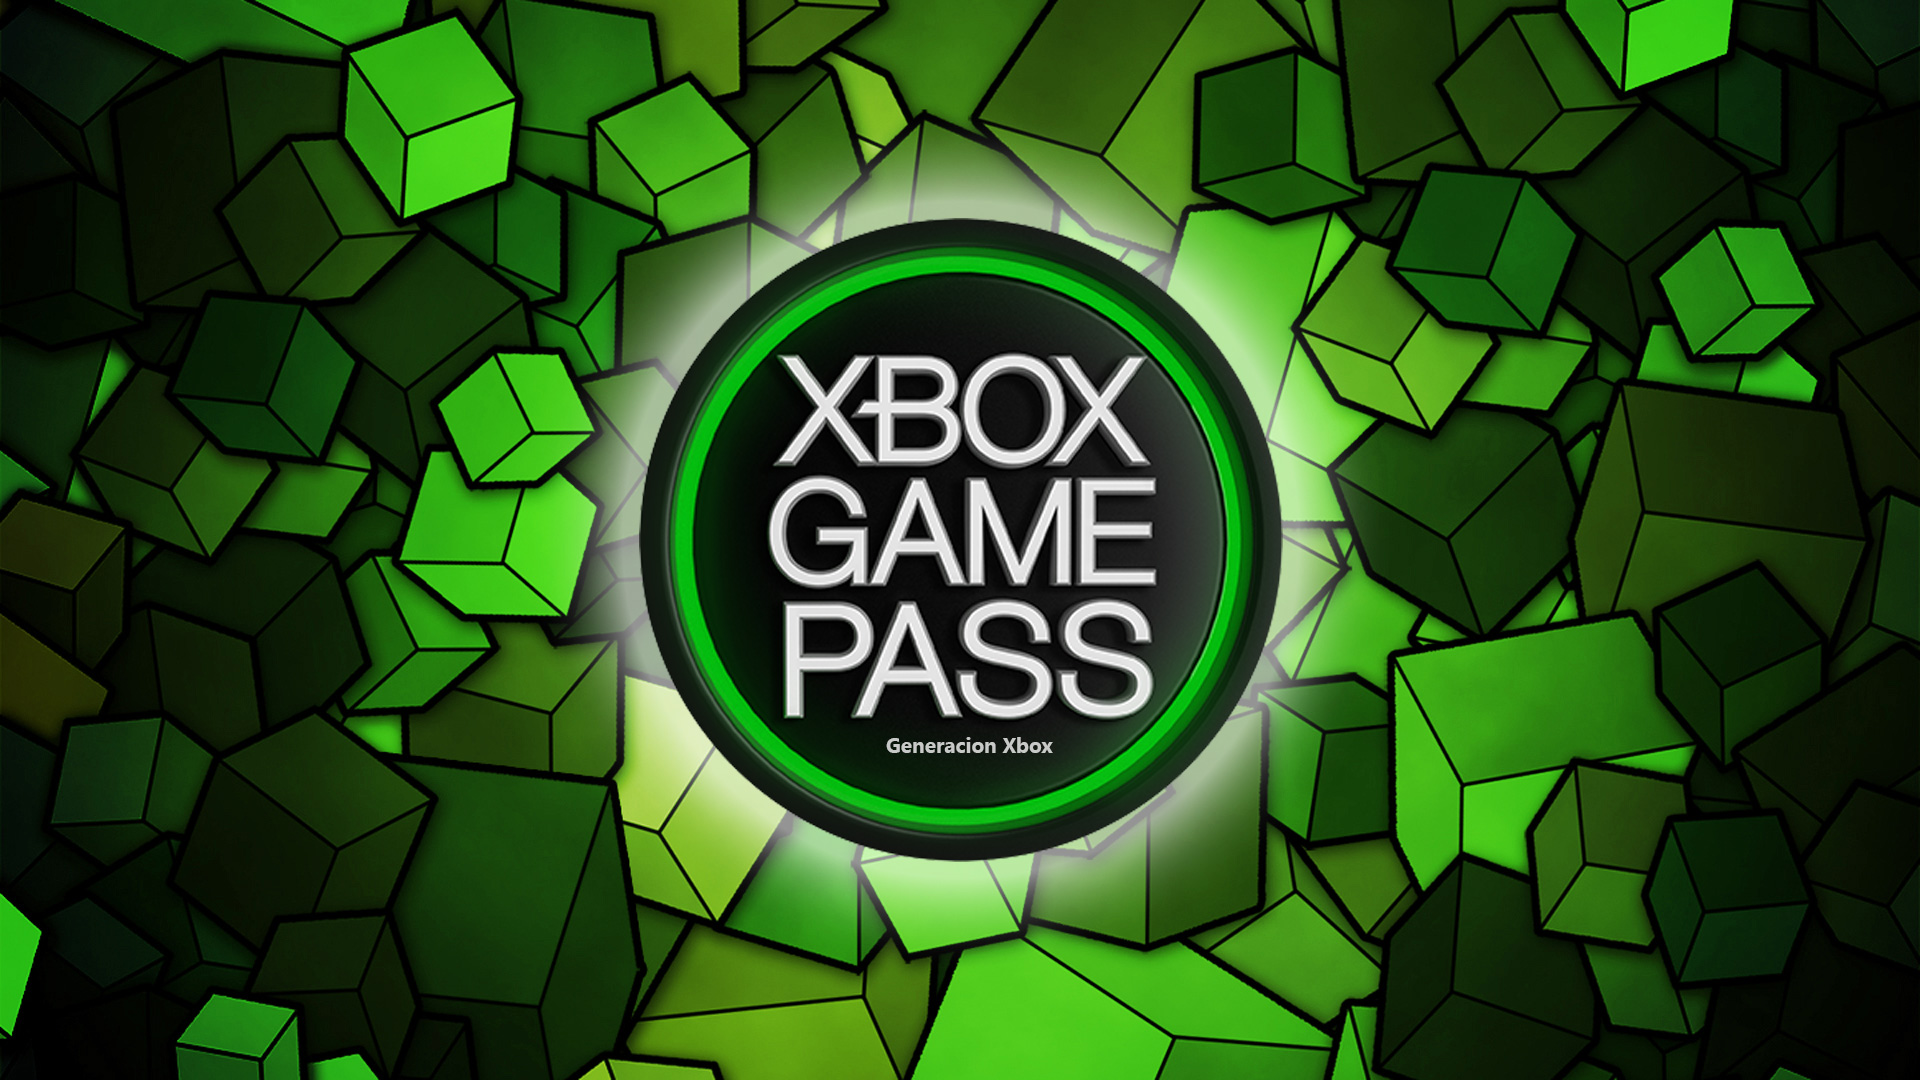 These are the first confirmed games coming to Xbox Game Pass in the second half of March